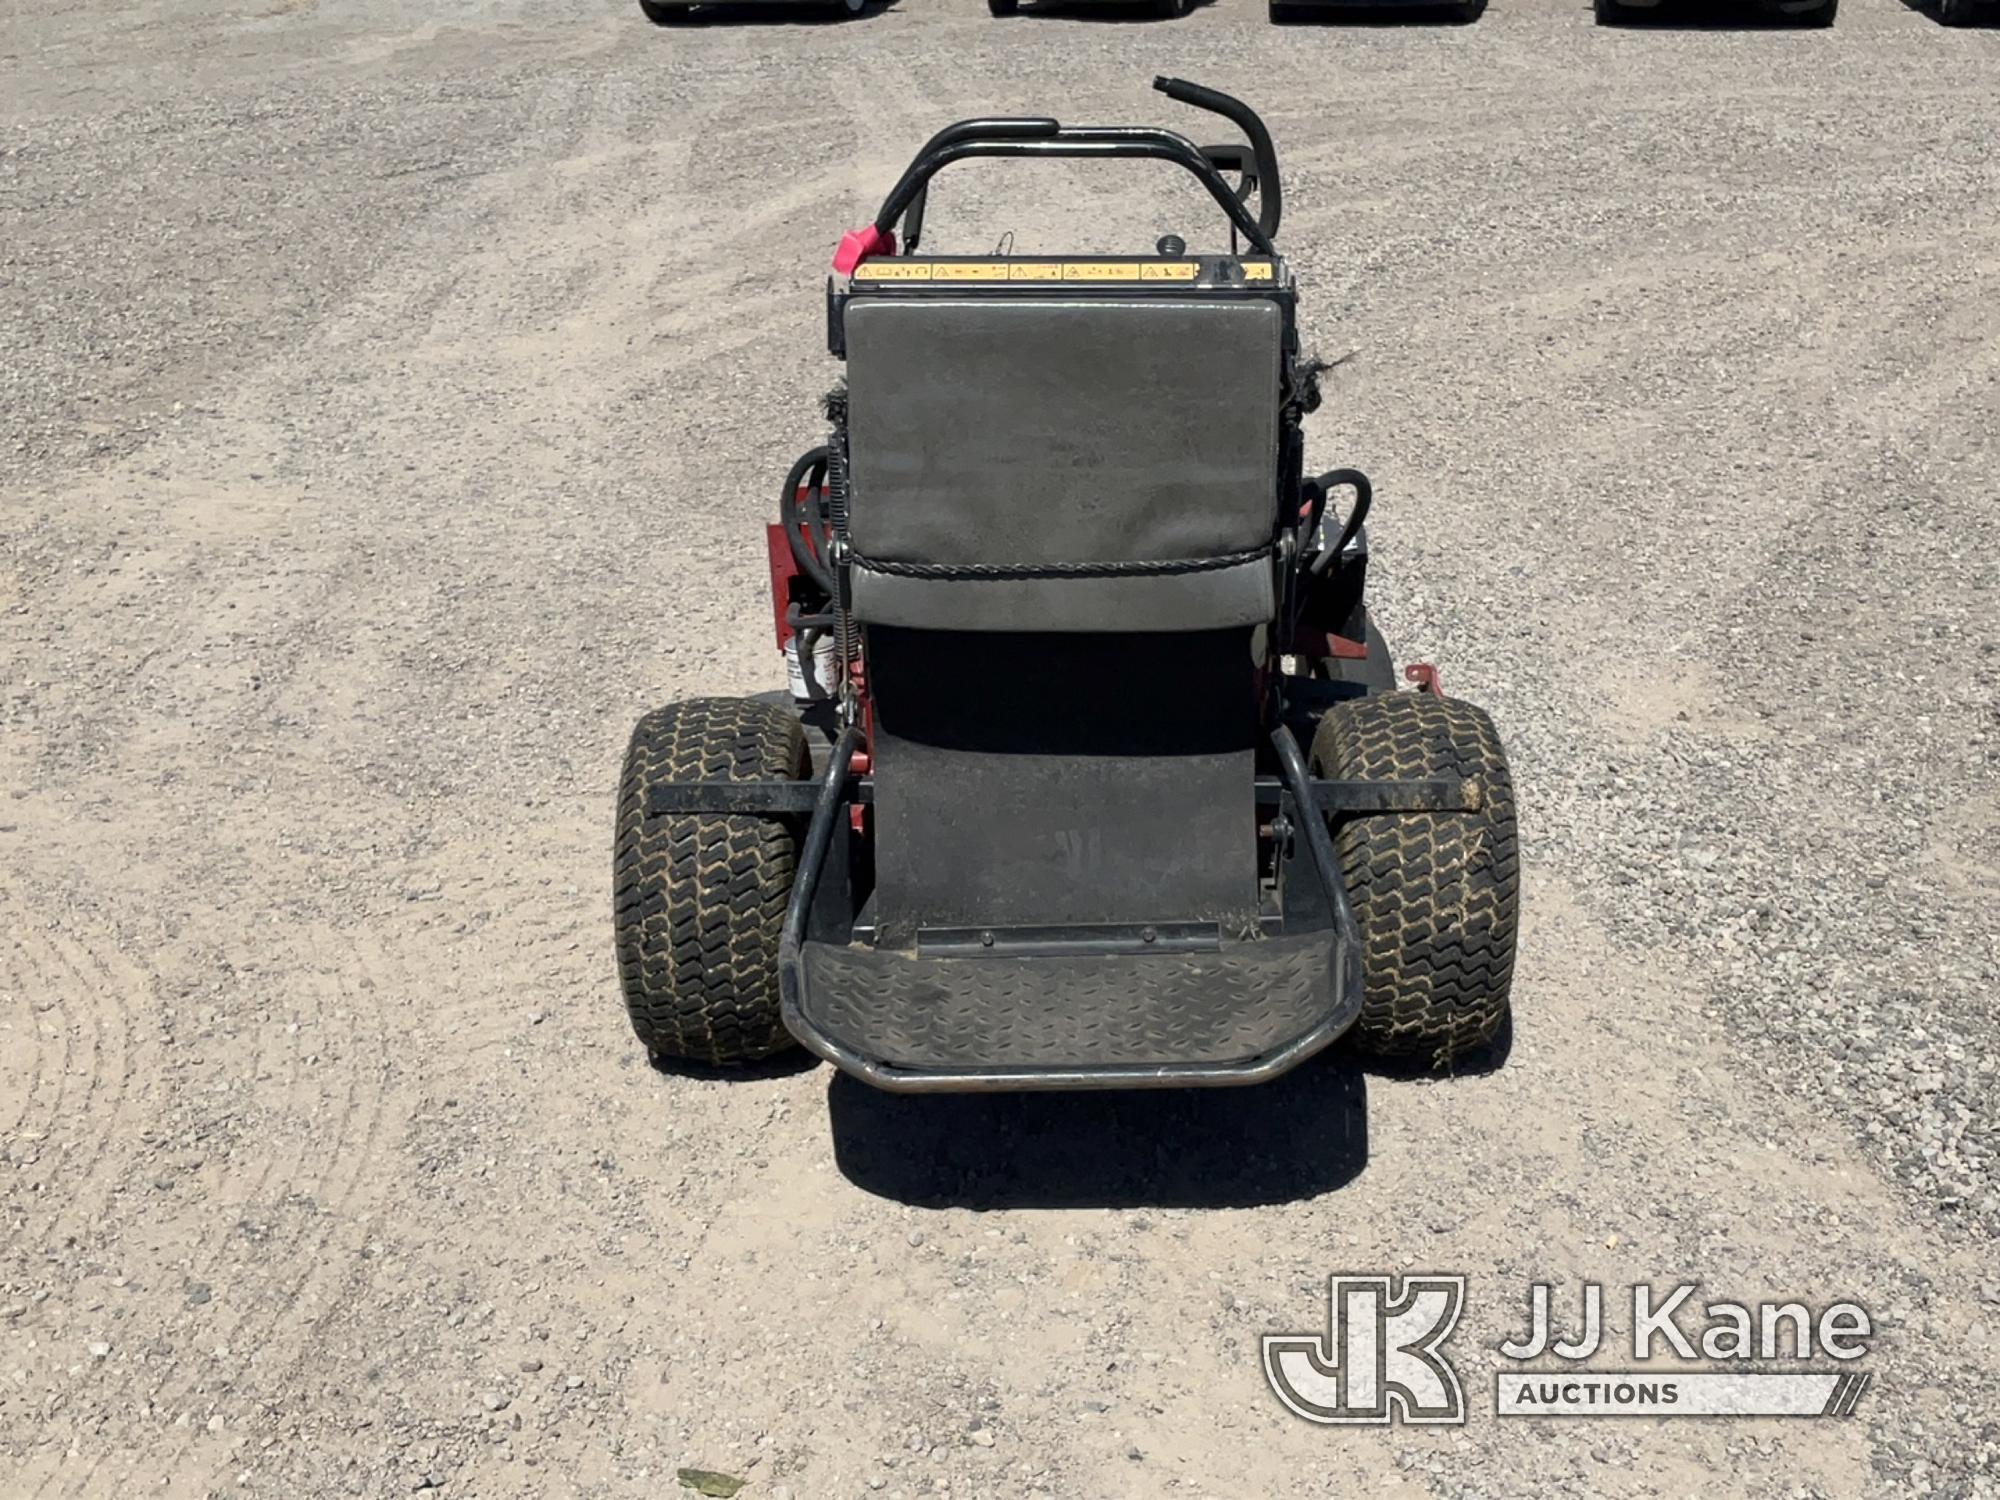 (Tracy-Clark, NV) 2016 Exmark Zero Turn Riding Mower Condition Unknown (no key), Seller Provided Yea